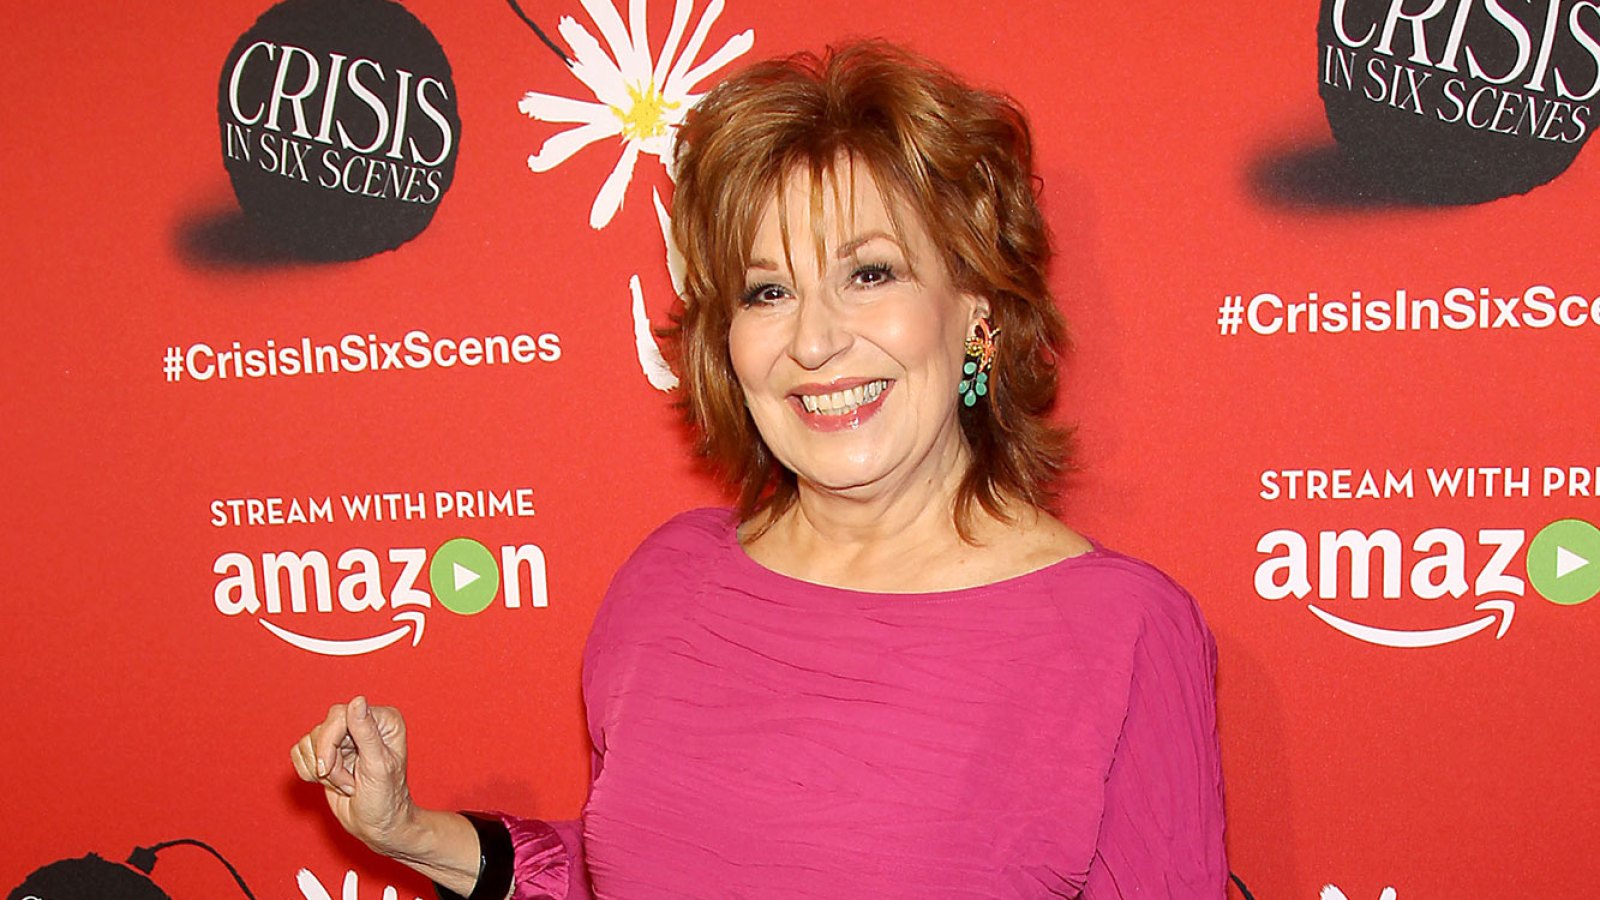 Joy Behar Takes Temporary Leave of Absence From The View Due to Coronavirus